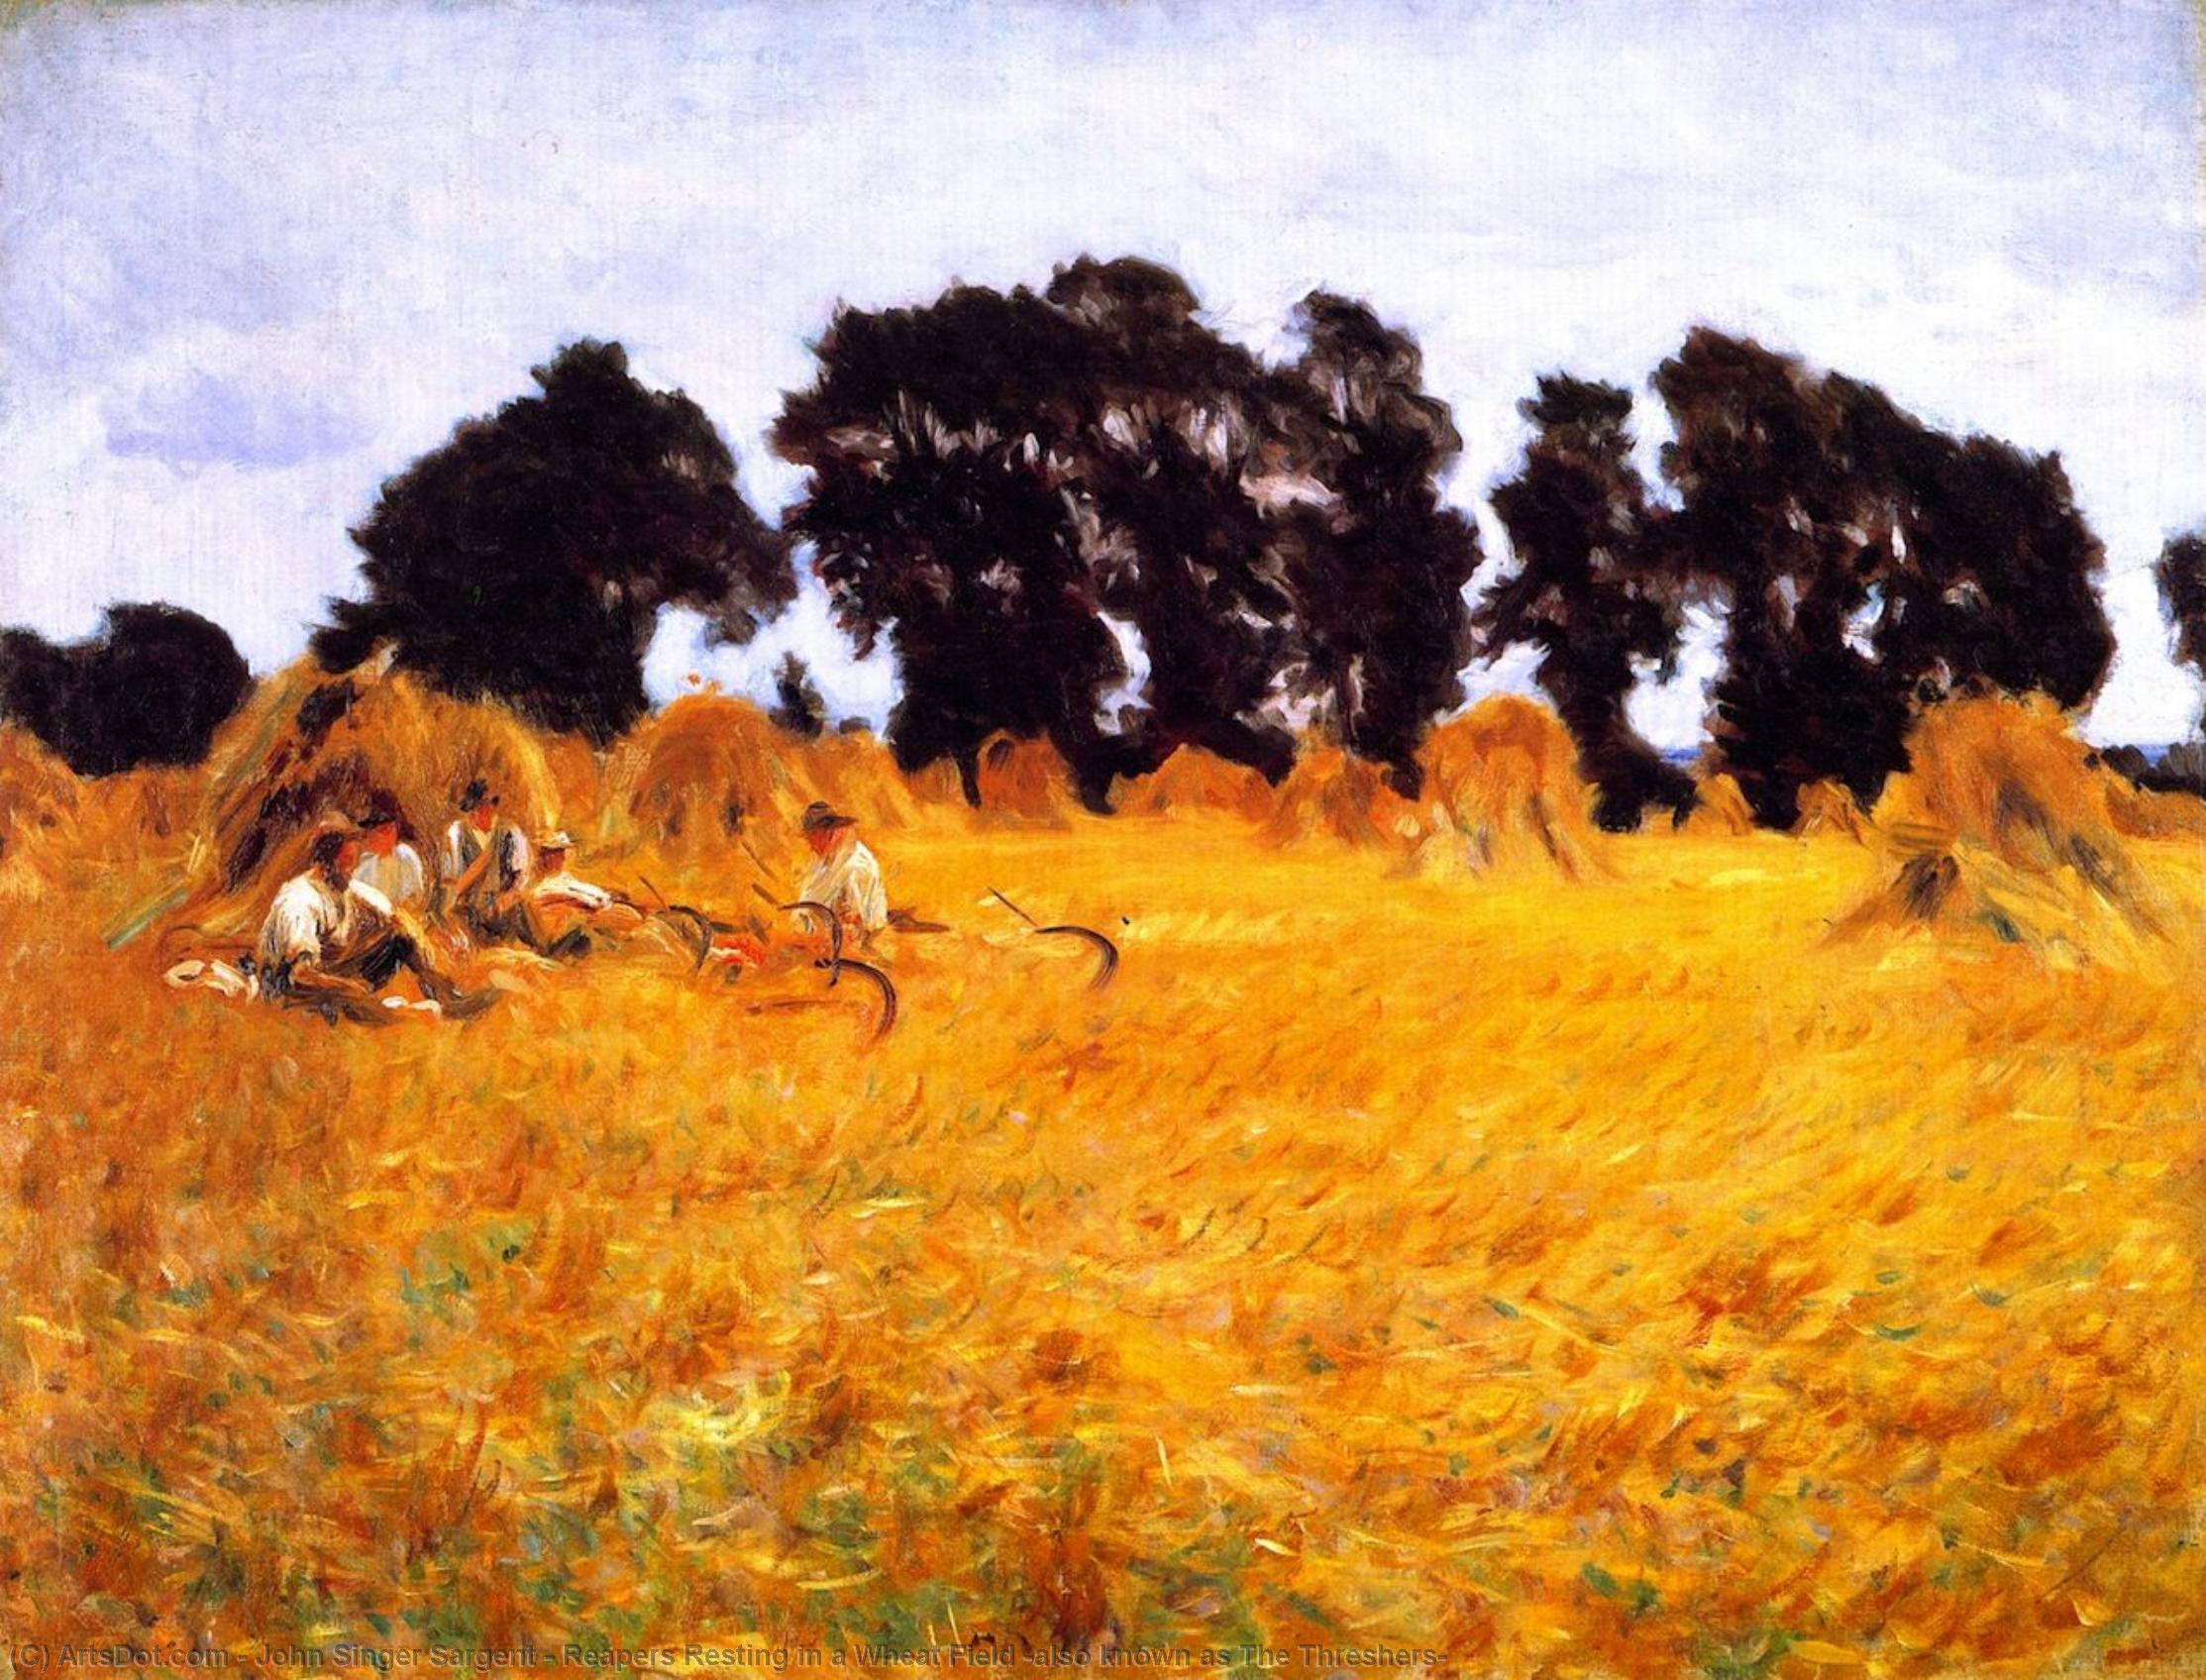 WikiOO.org - Encyclopedia of Fine Arts - Maleri, Artwork John Singer Sargent - Reapers Resting in a Wheat Field (also known as The Threshers)